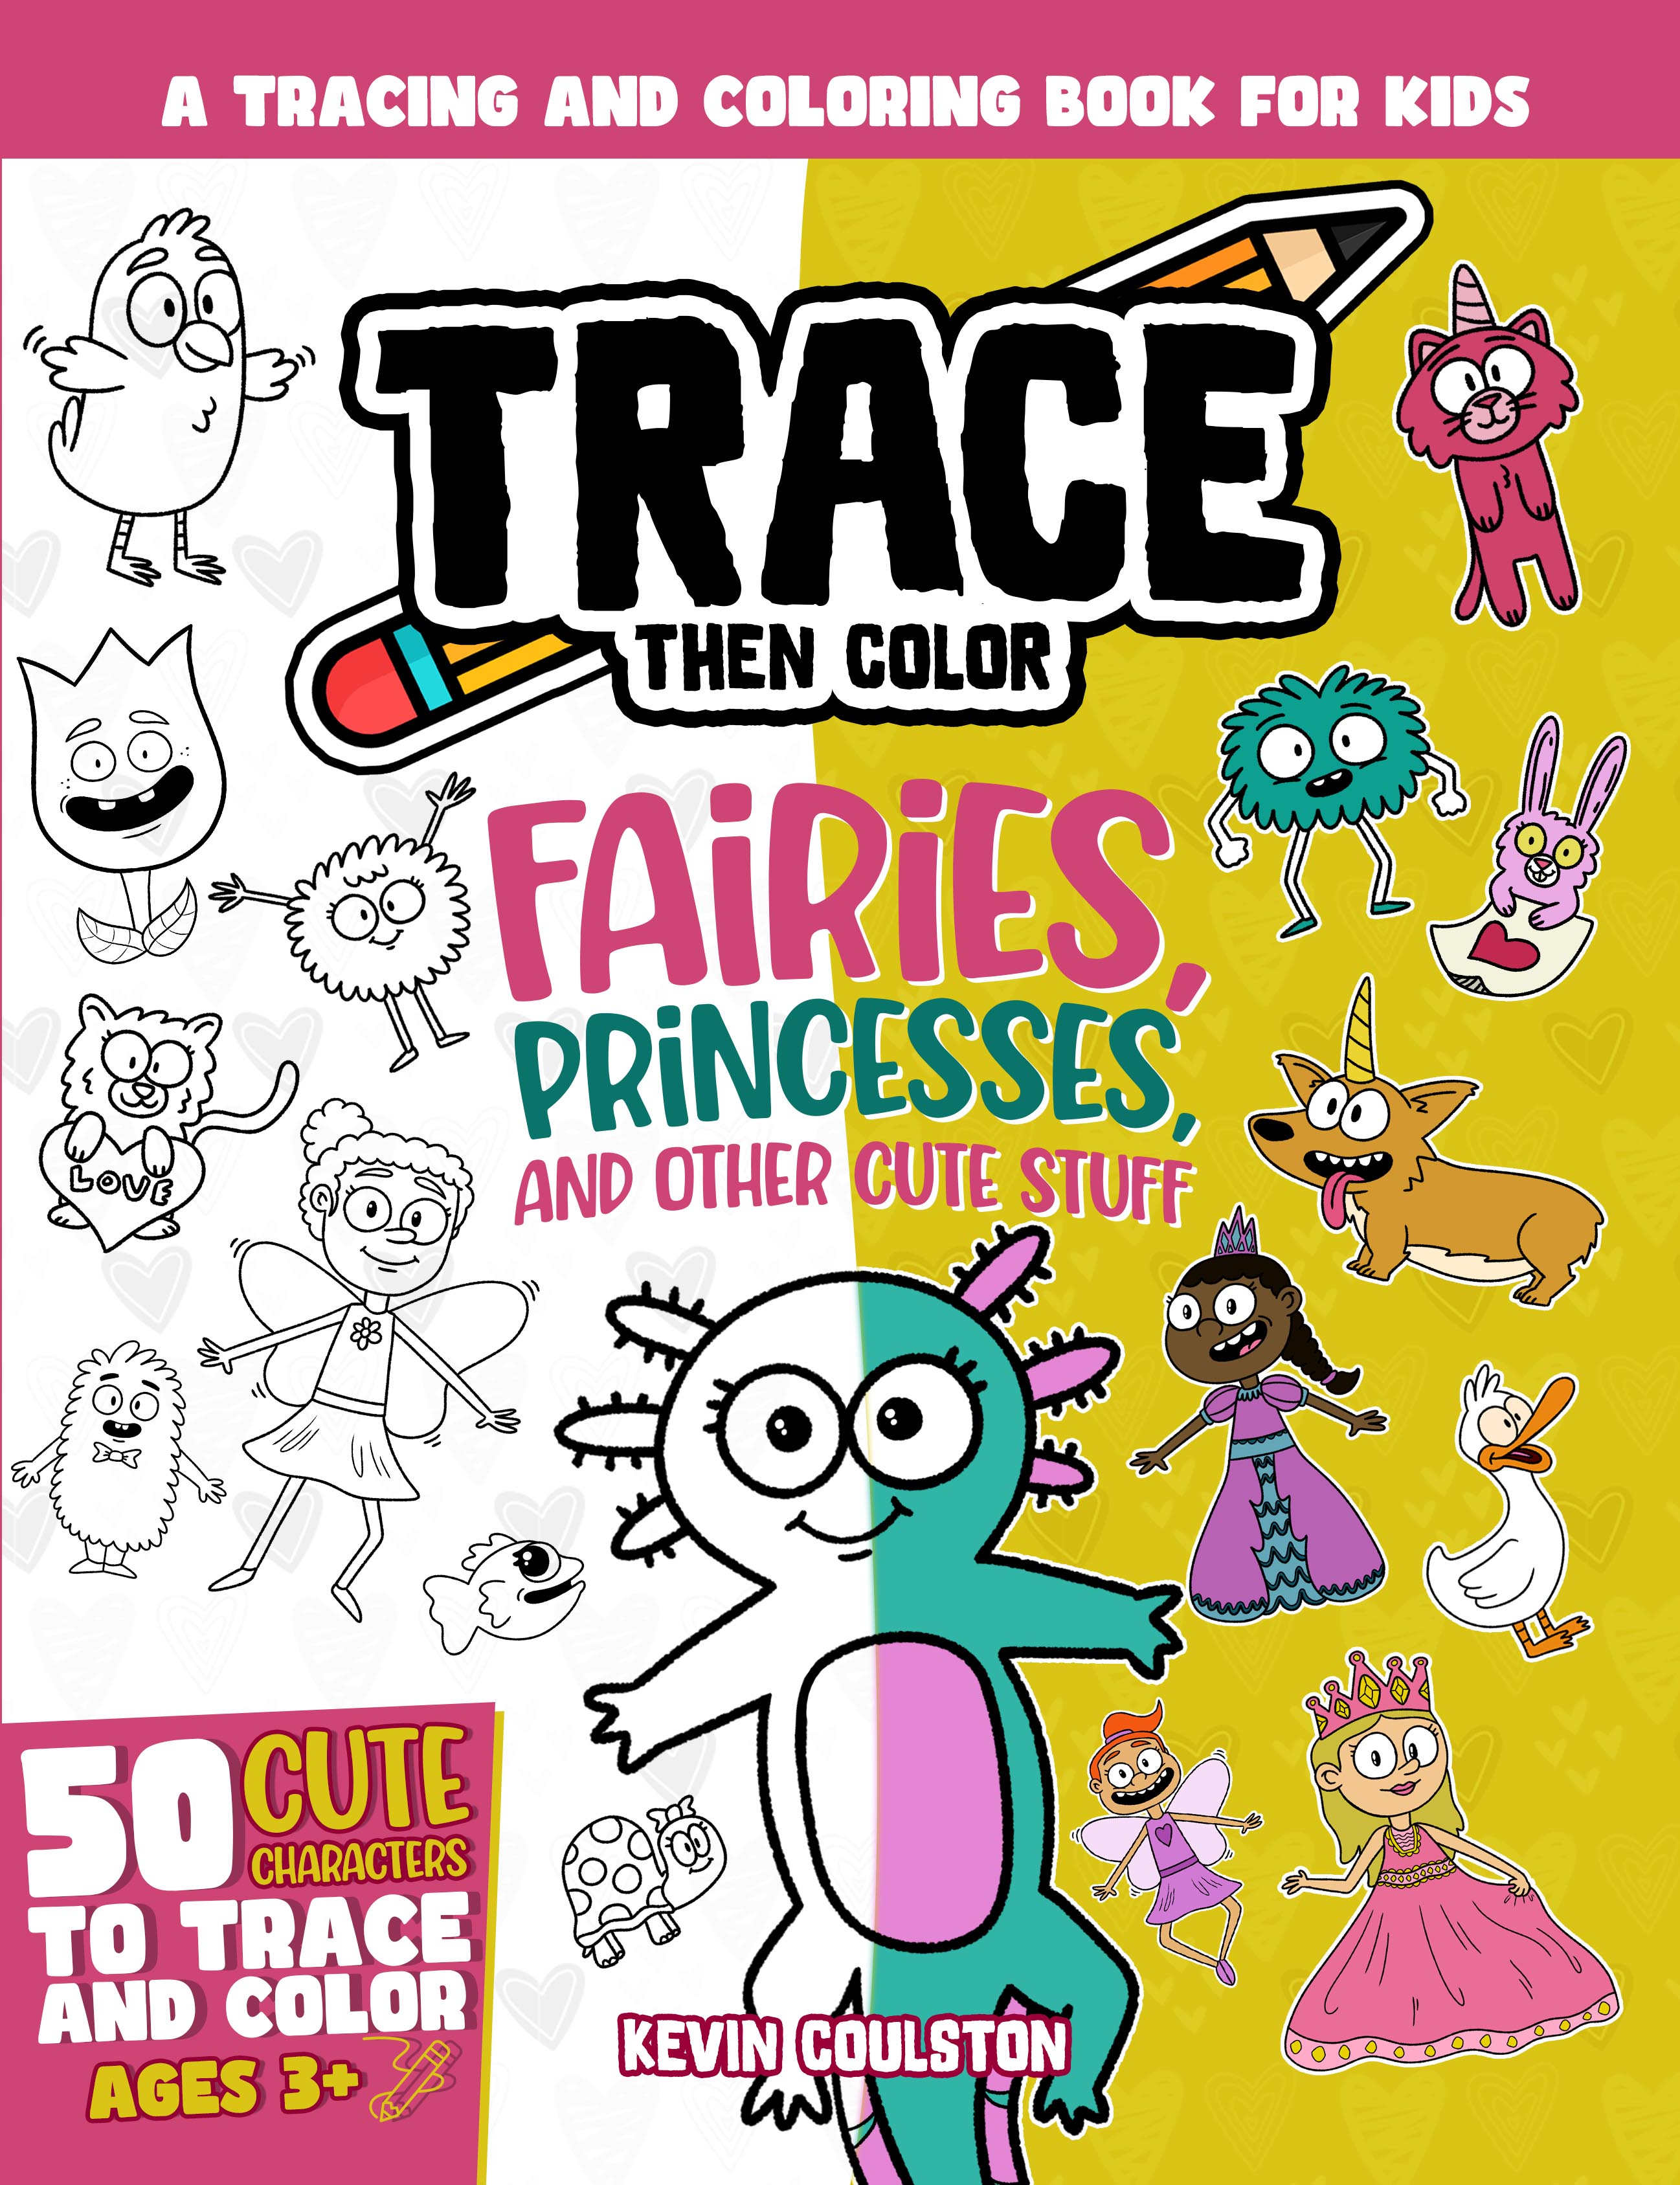 Trace Then Color: Cats and Dogs